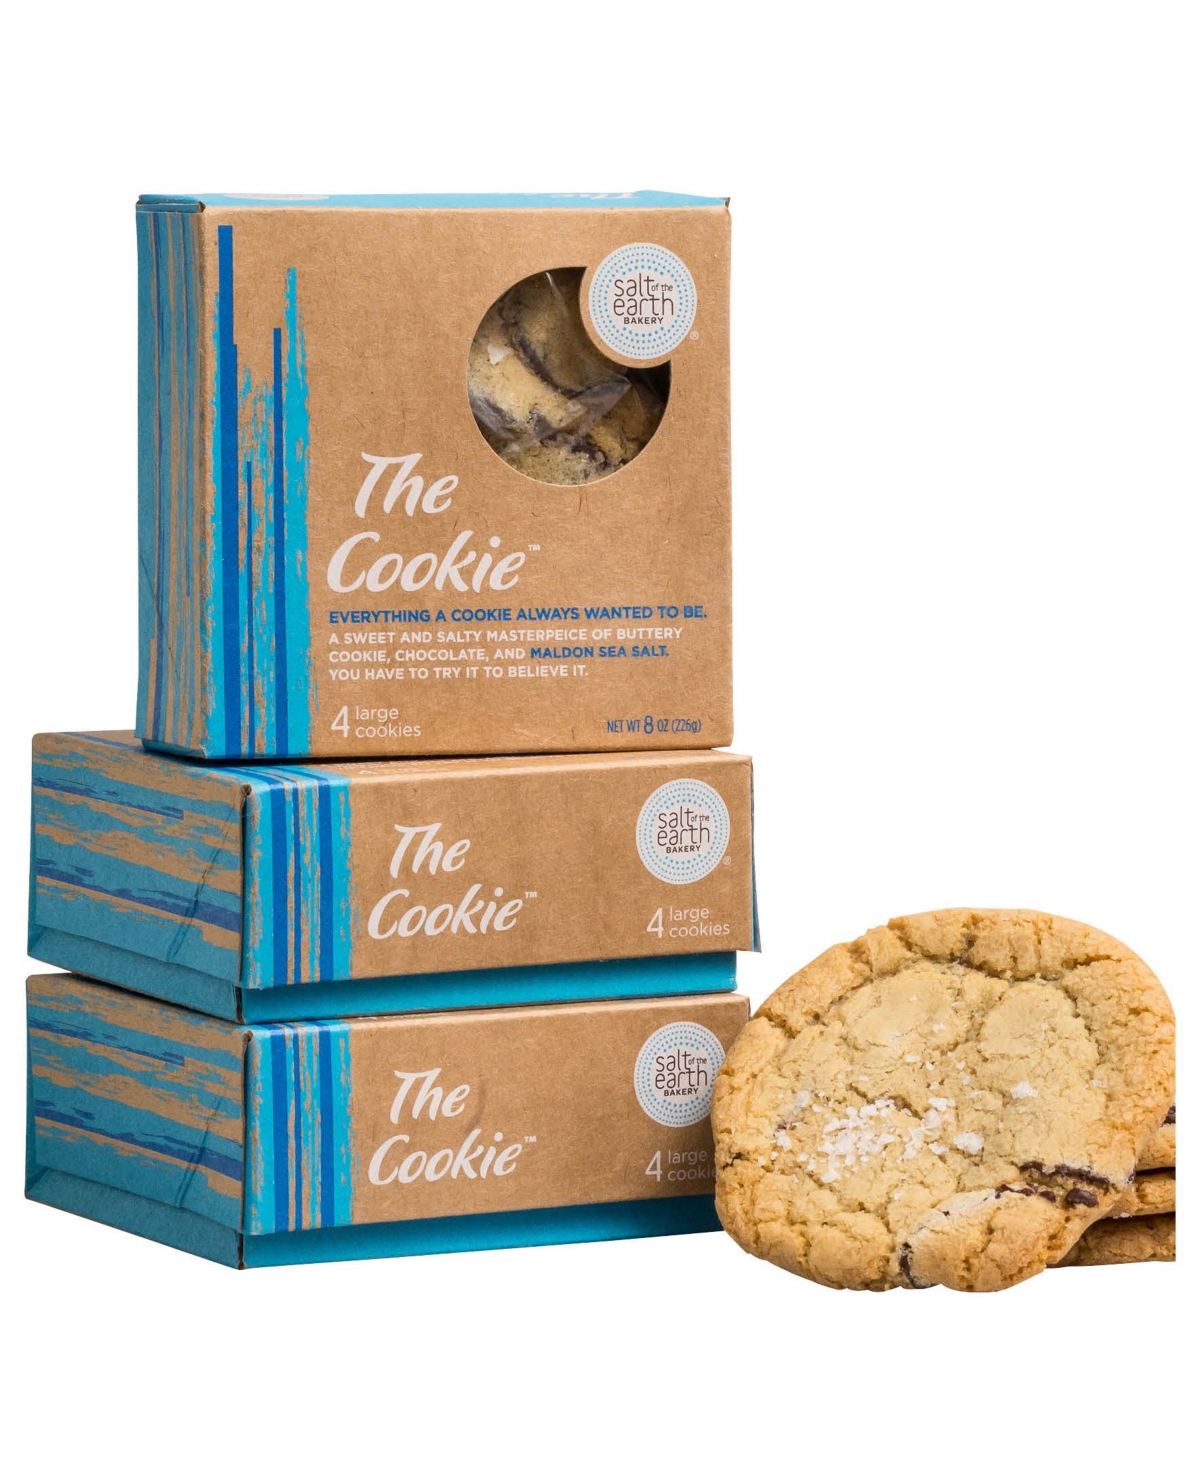 Salt Of The Earth Bakery The Cookie Chocolate Chip, 12 Piece In Turquoise